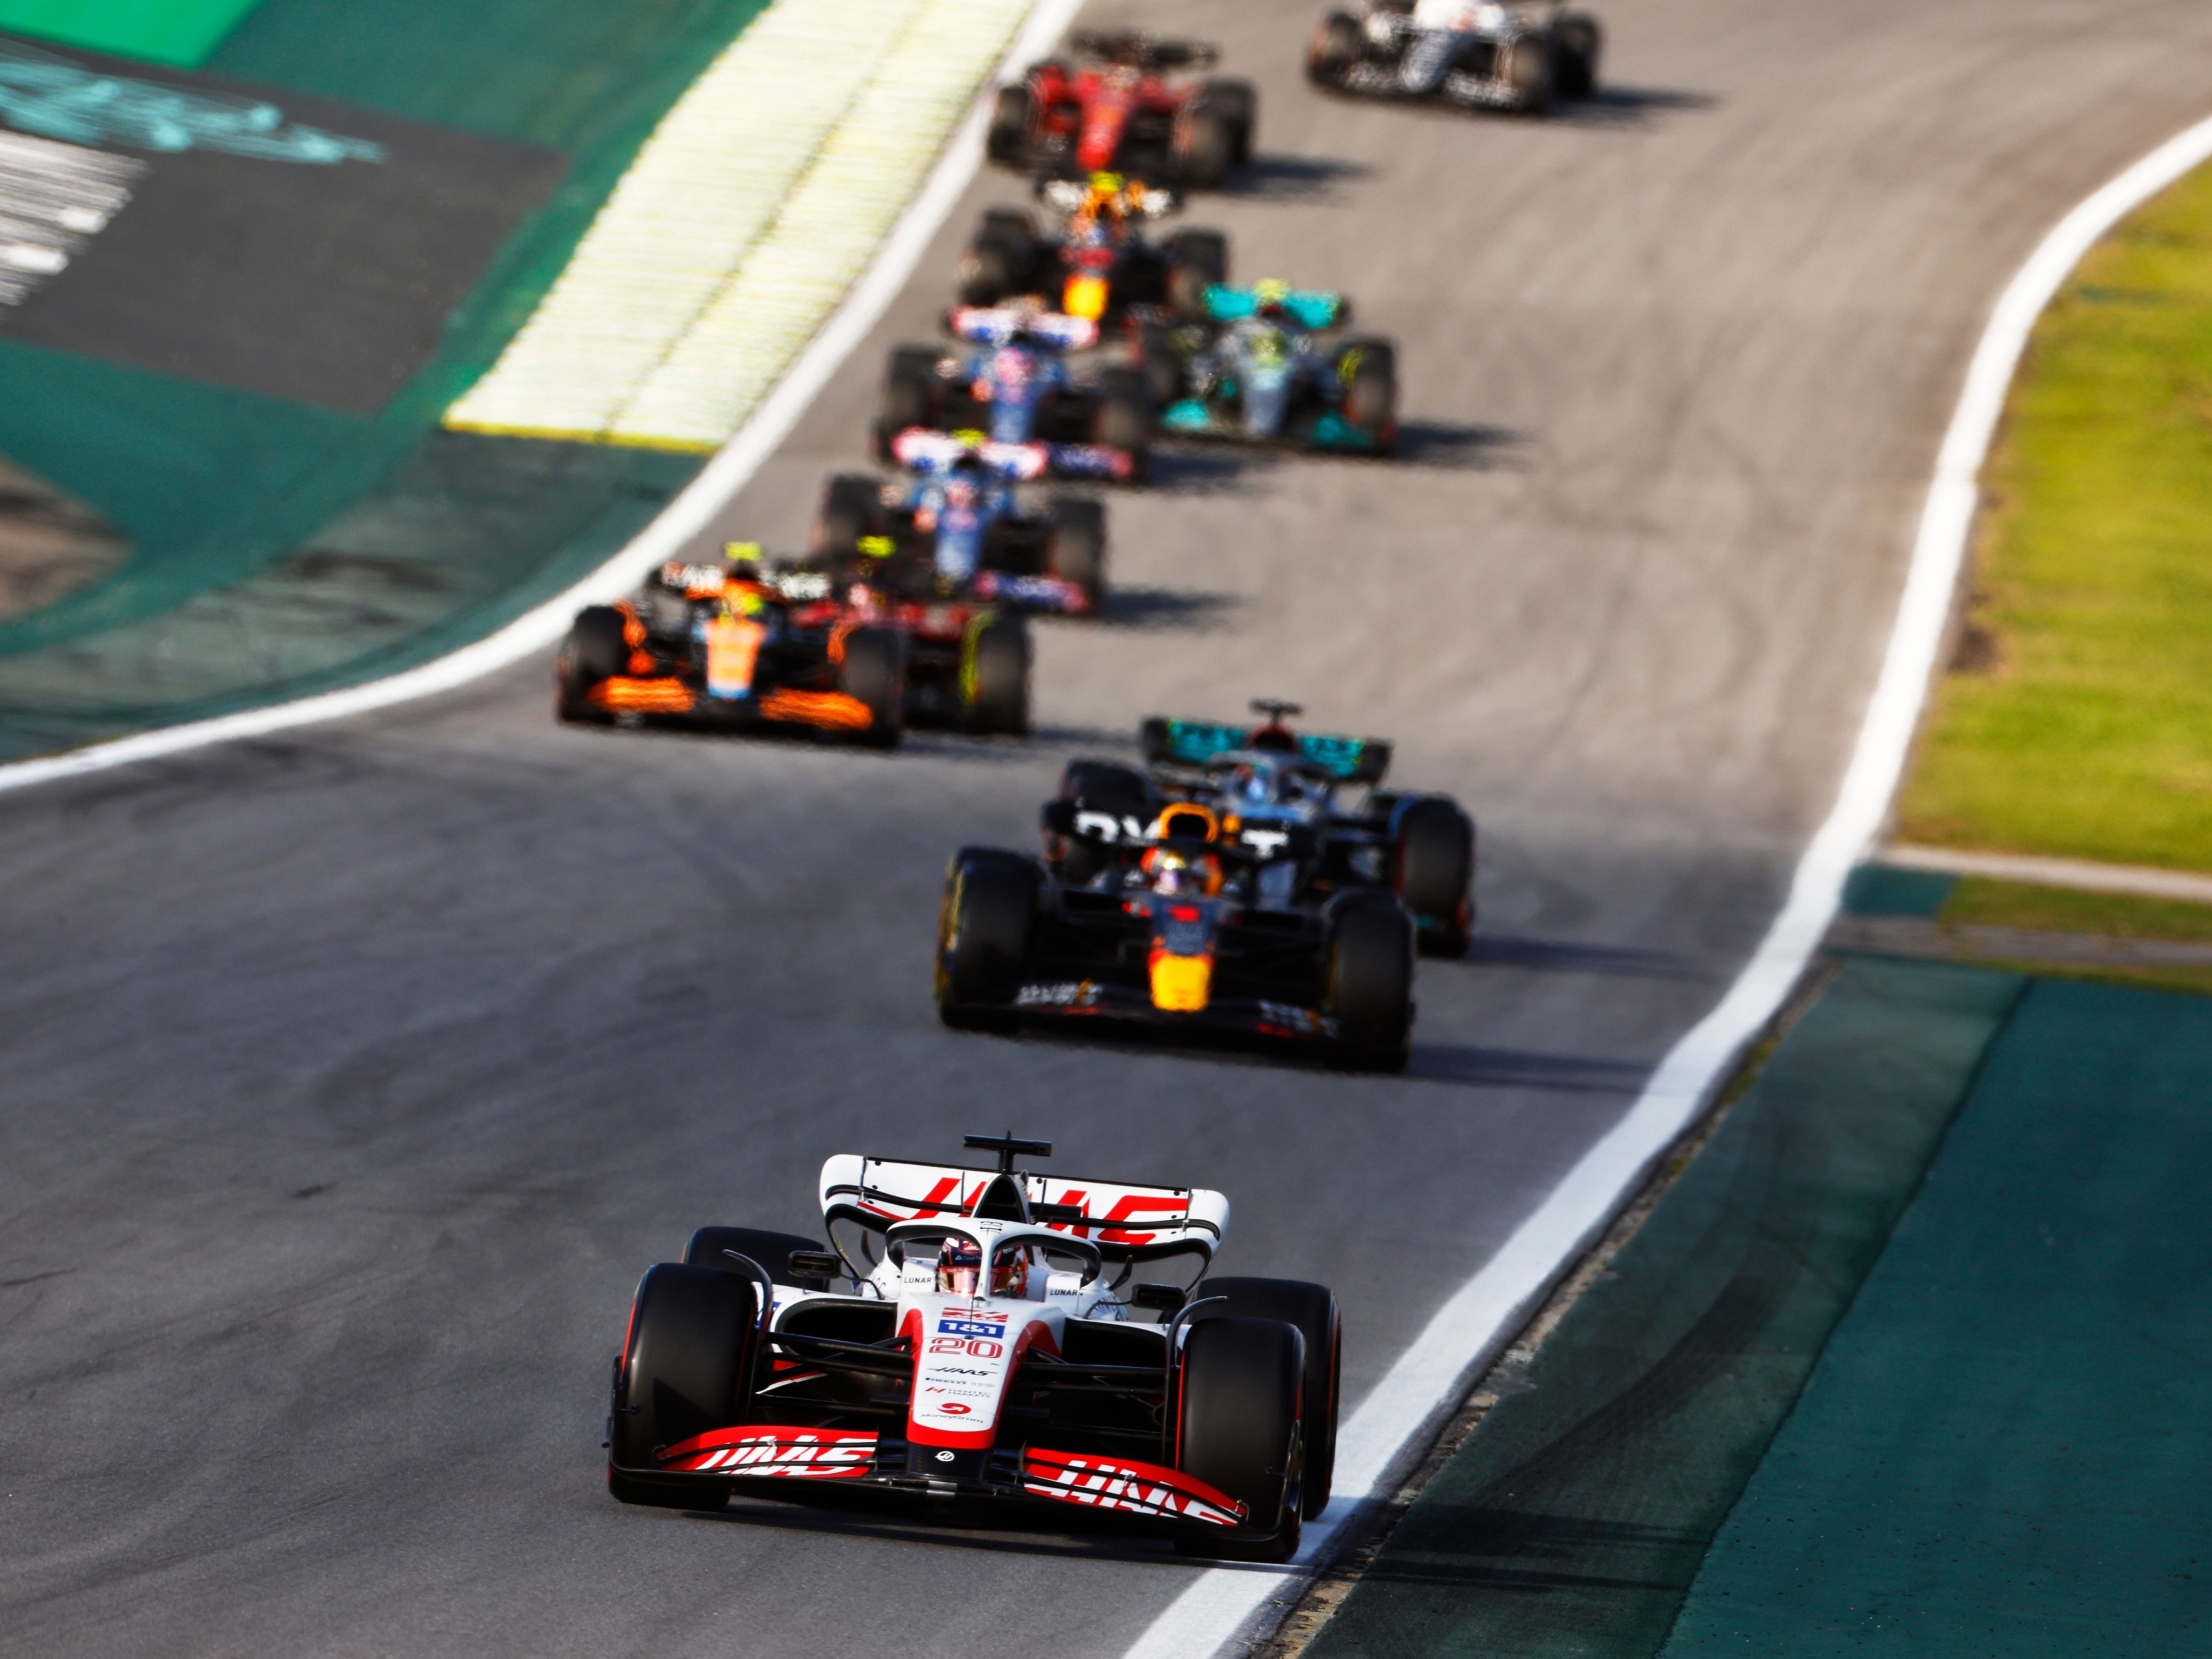 Kevin Magnussen (20) leads Max Verstappen (1) and the rest of the field at the start during the Sprint ahead of the 2022 F1 Brazilian Grand Prix (Photo by Chris Graythen/Getty Images)